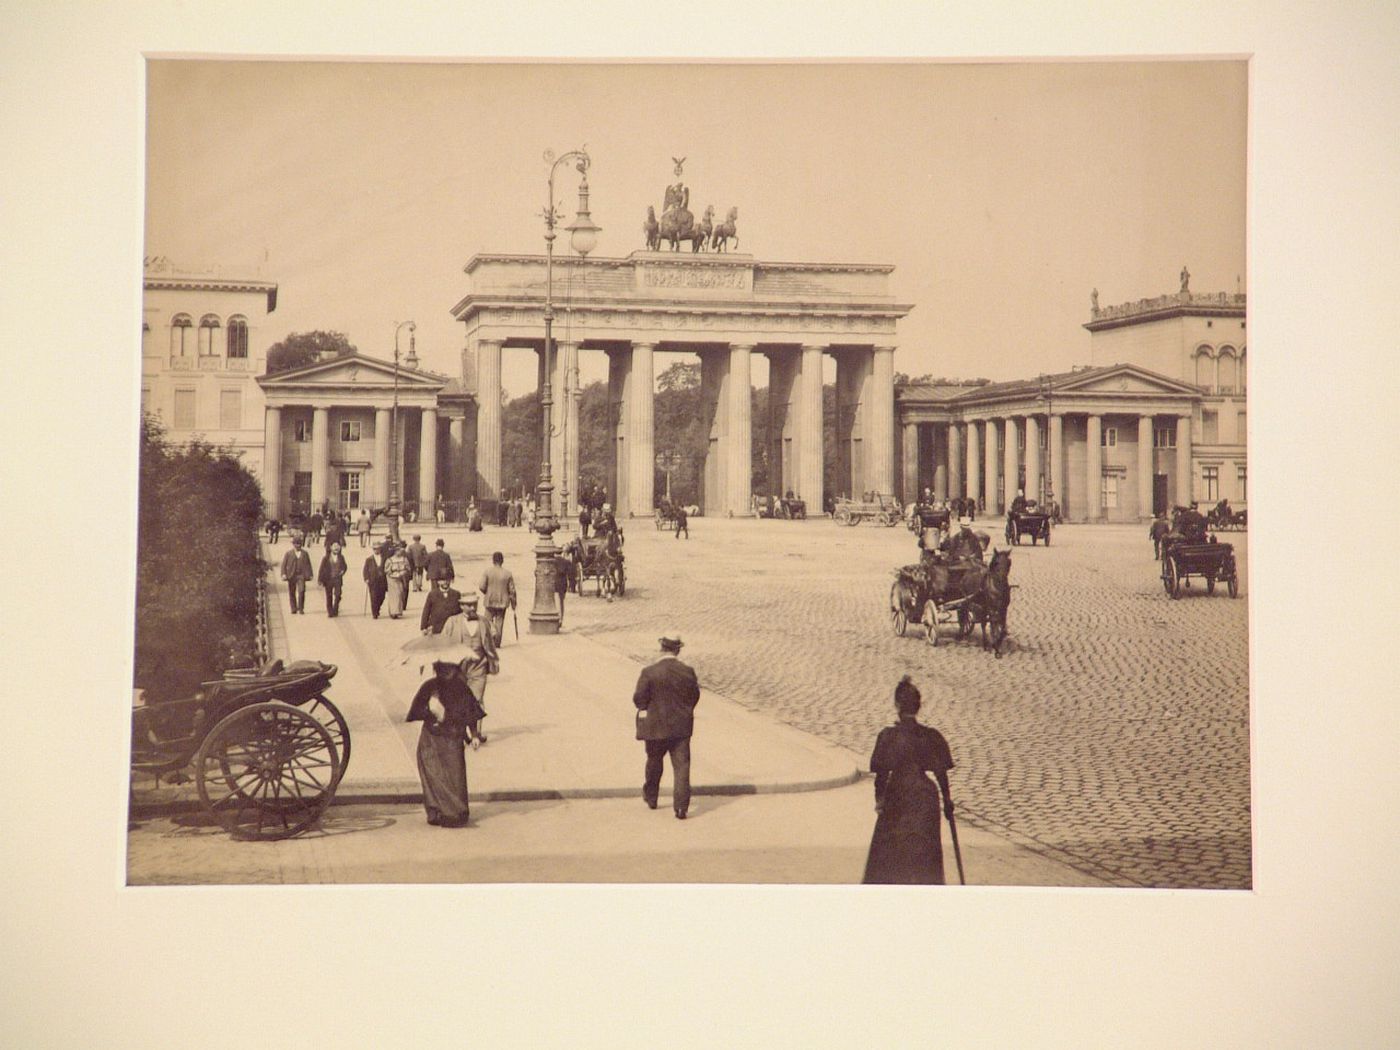 View of the Branderburger Tor and Pariser Platz from the east, Berlin, Germany